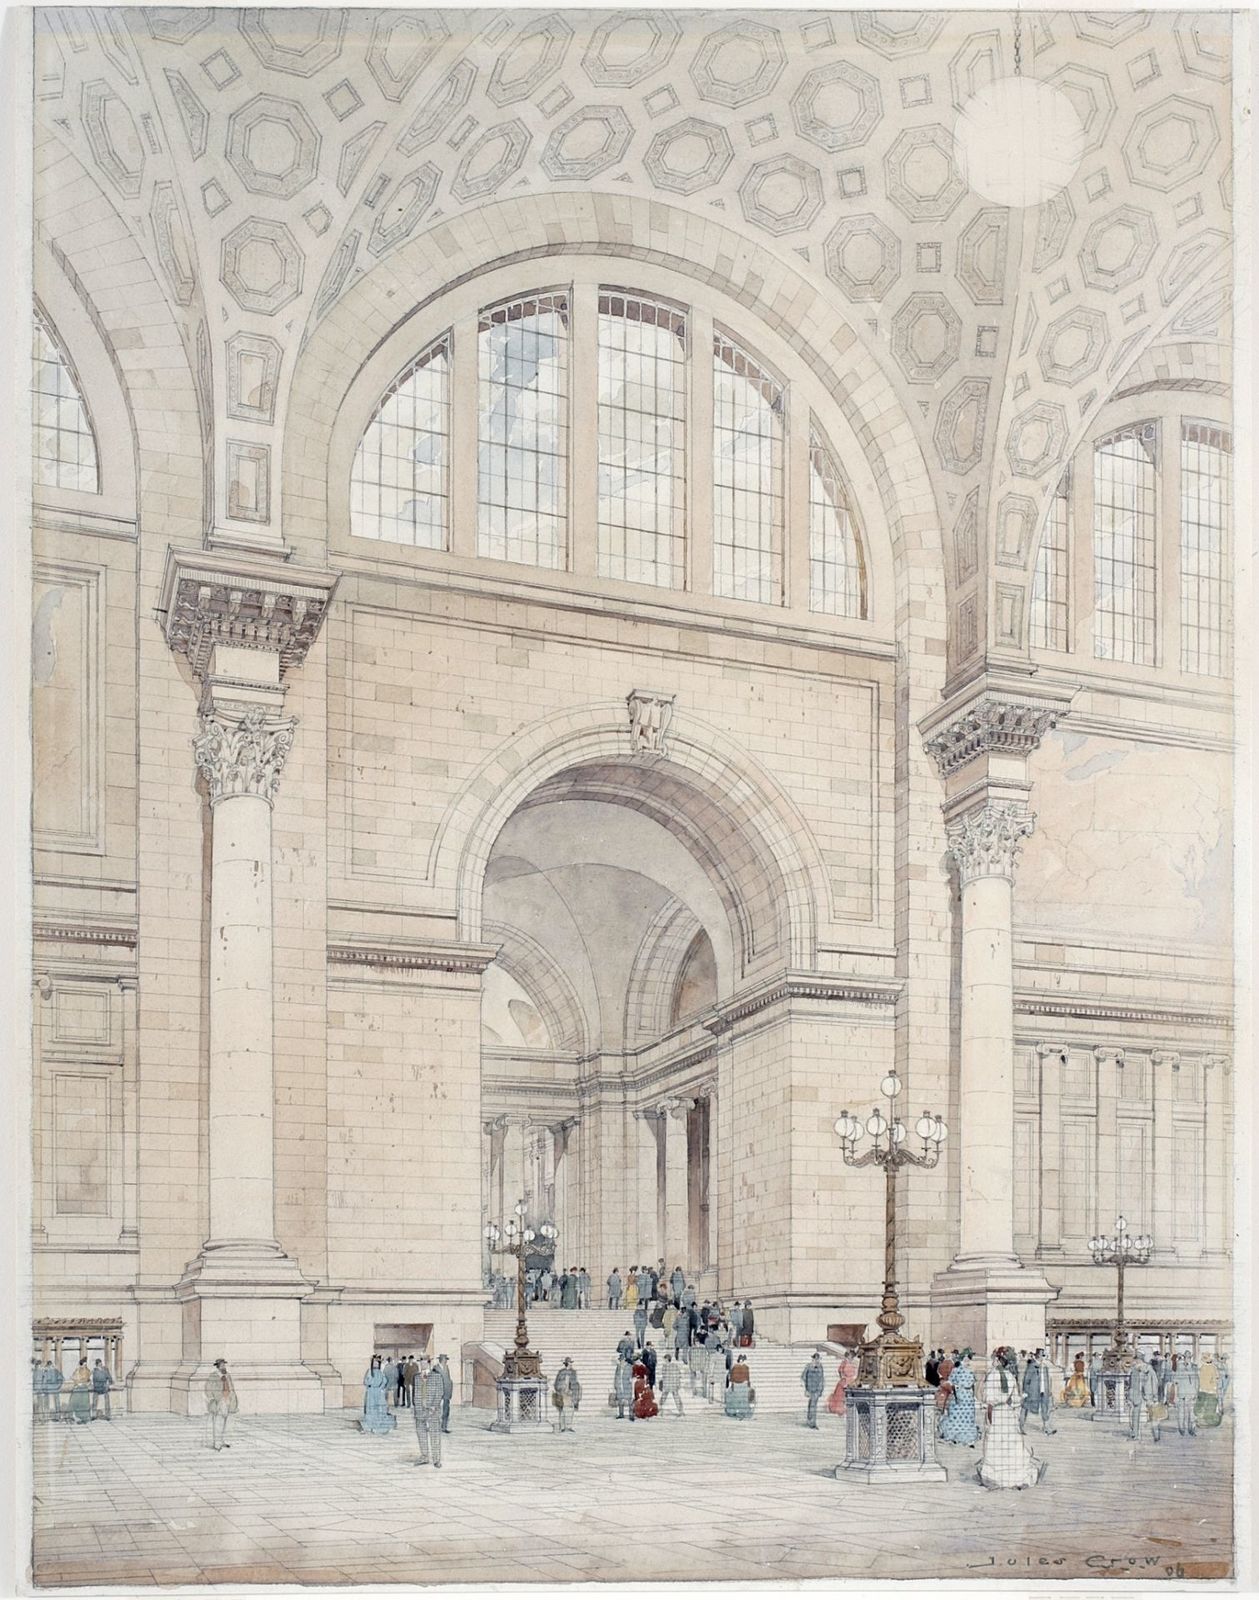 McKim, Mead &amp; White. Pennsylvania Station in New York City. Drawing by Jules Crow. 1906 &copy; New-York Historical Society, PR042, McKim, Mead &amp; White Collection